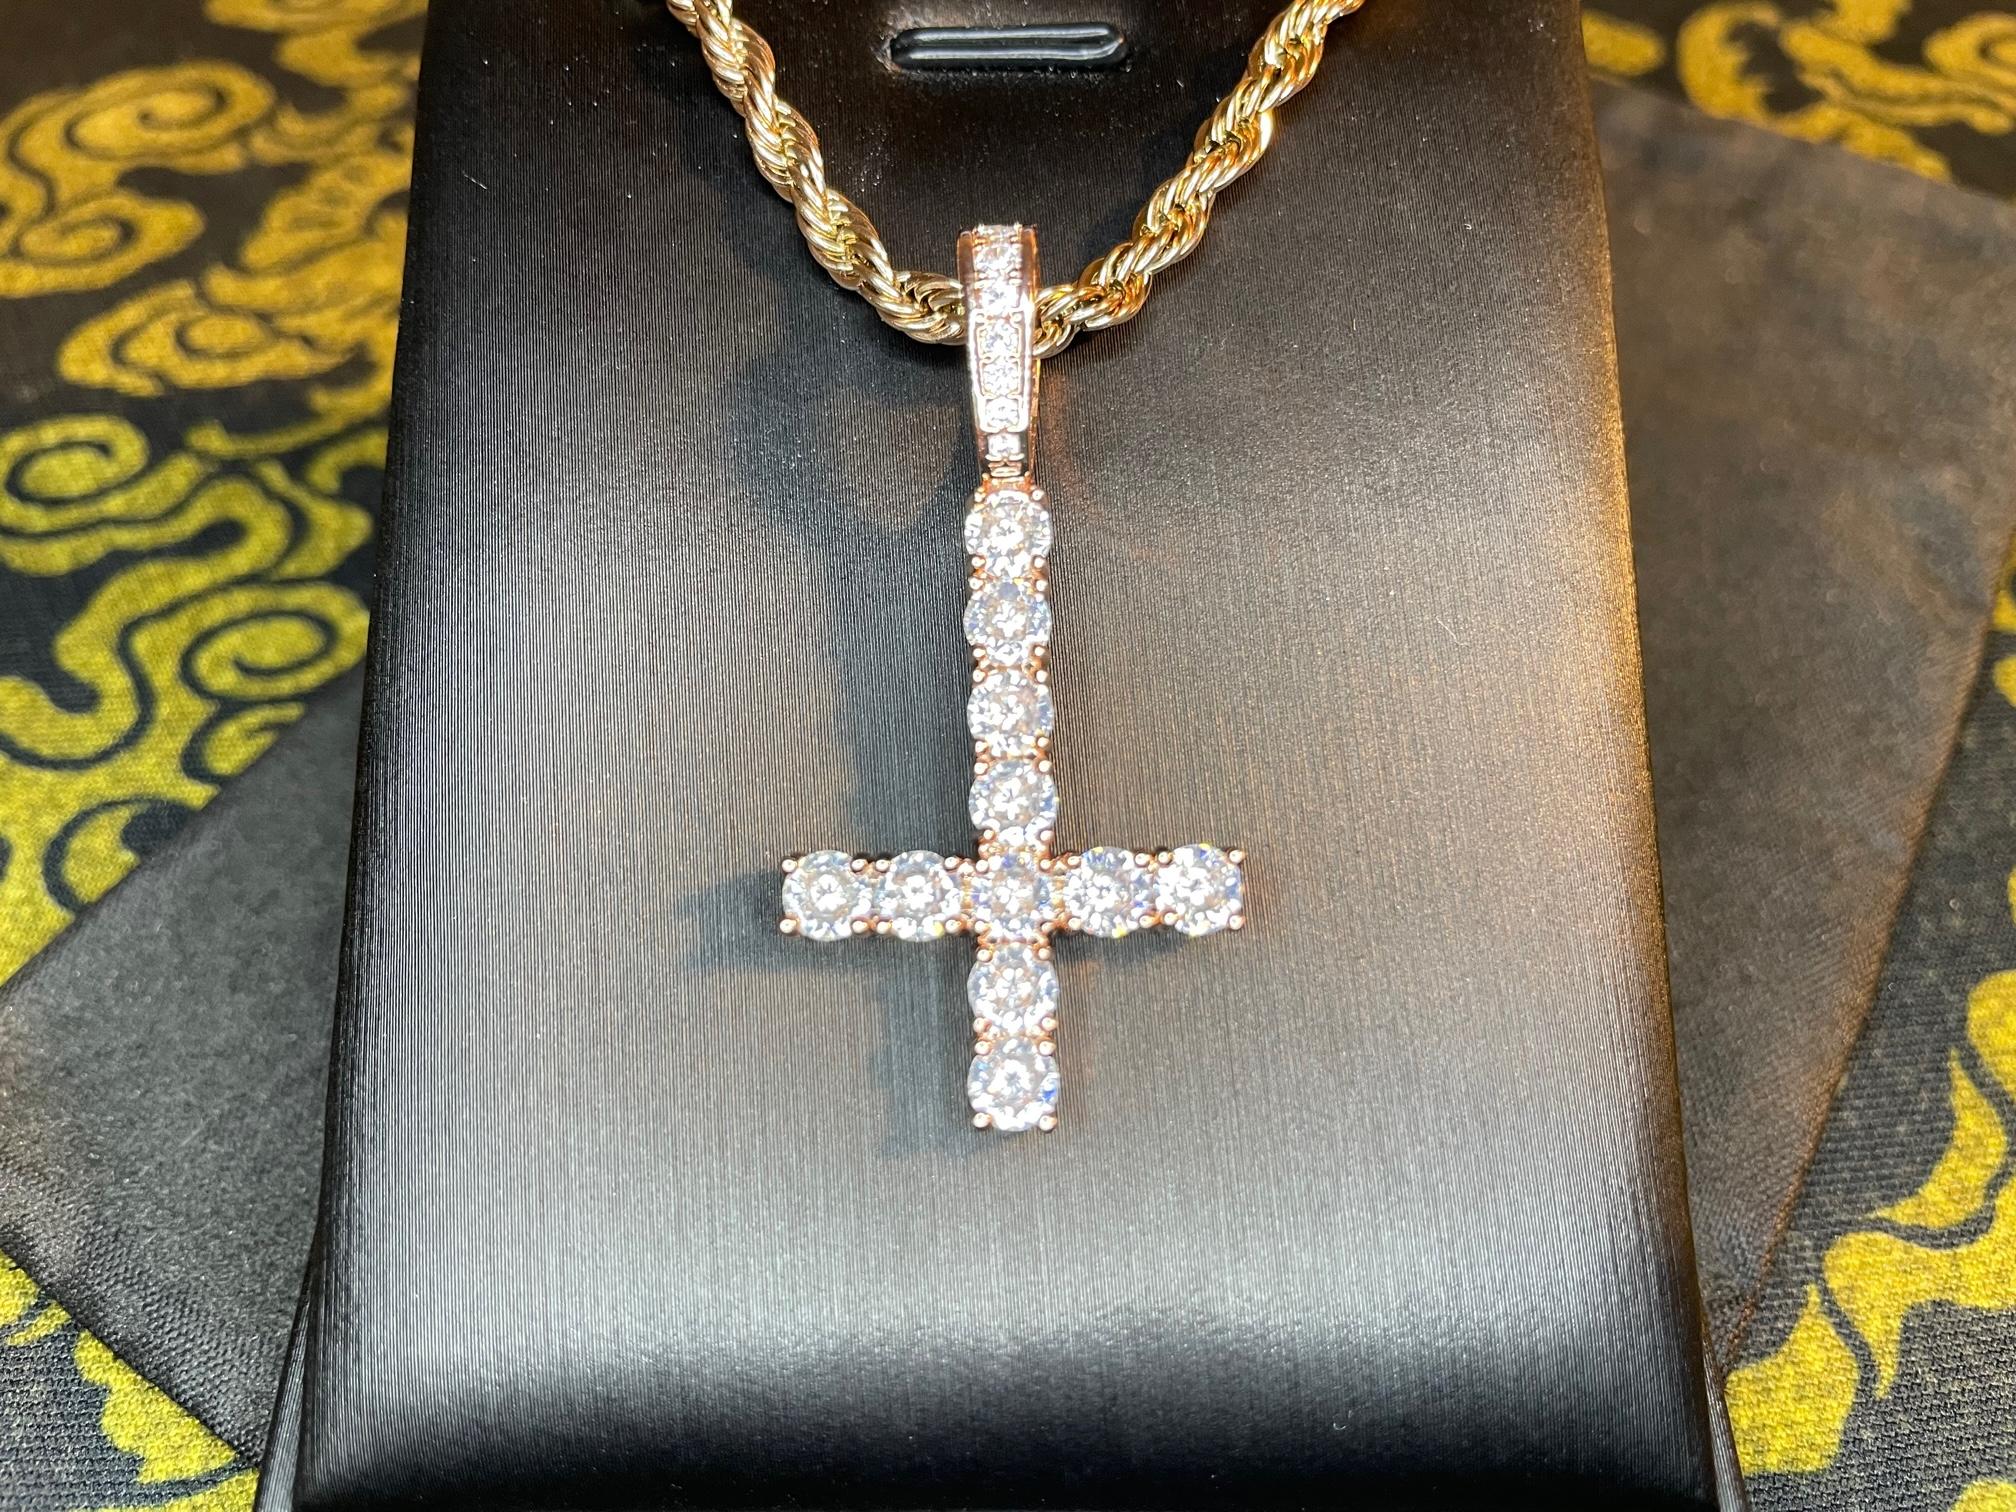 diamond upside down inverted cross rose gold pendant rope necklace goth minimalist retro satanic pagan wiccan occult darkness jewelry